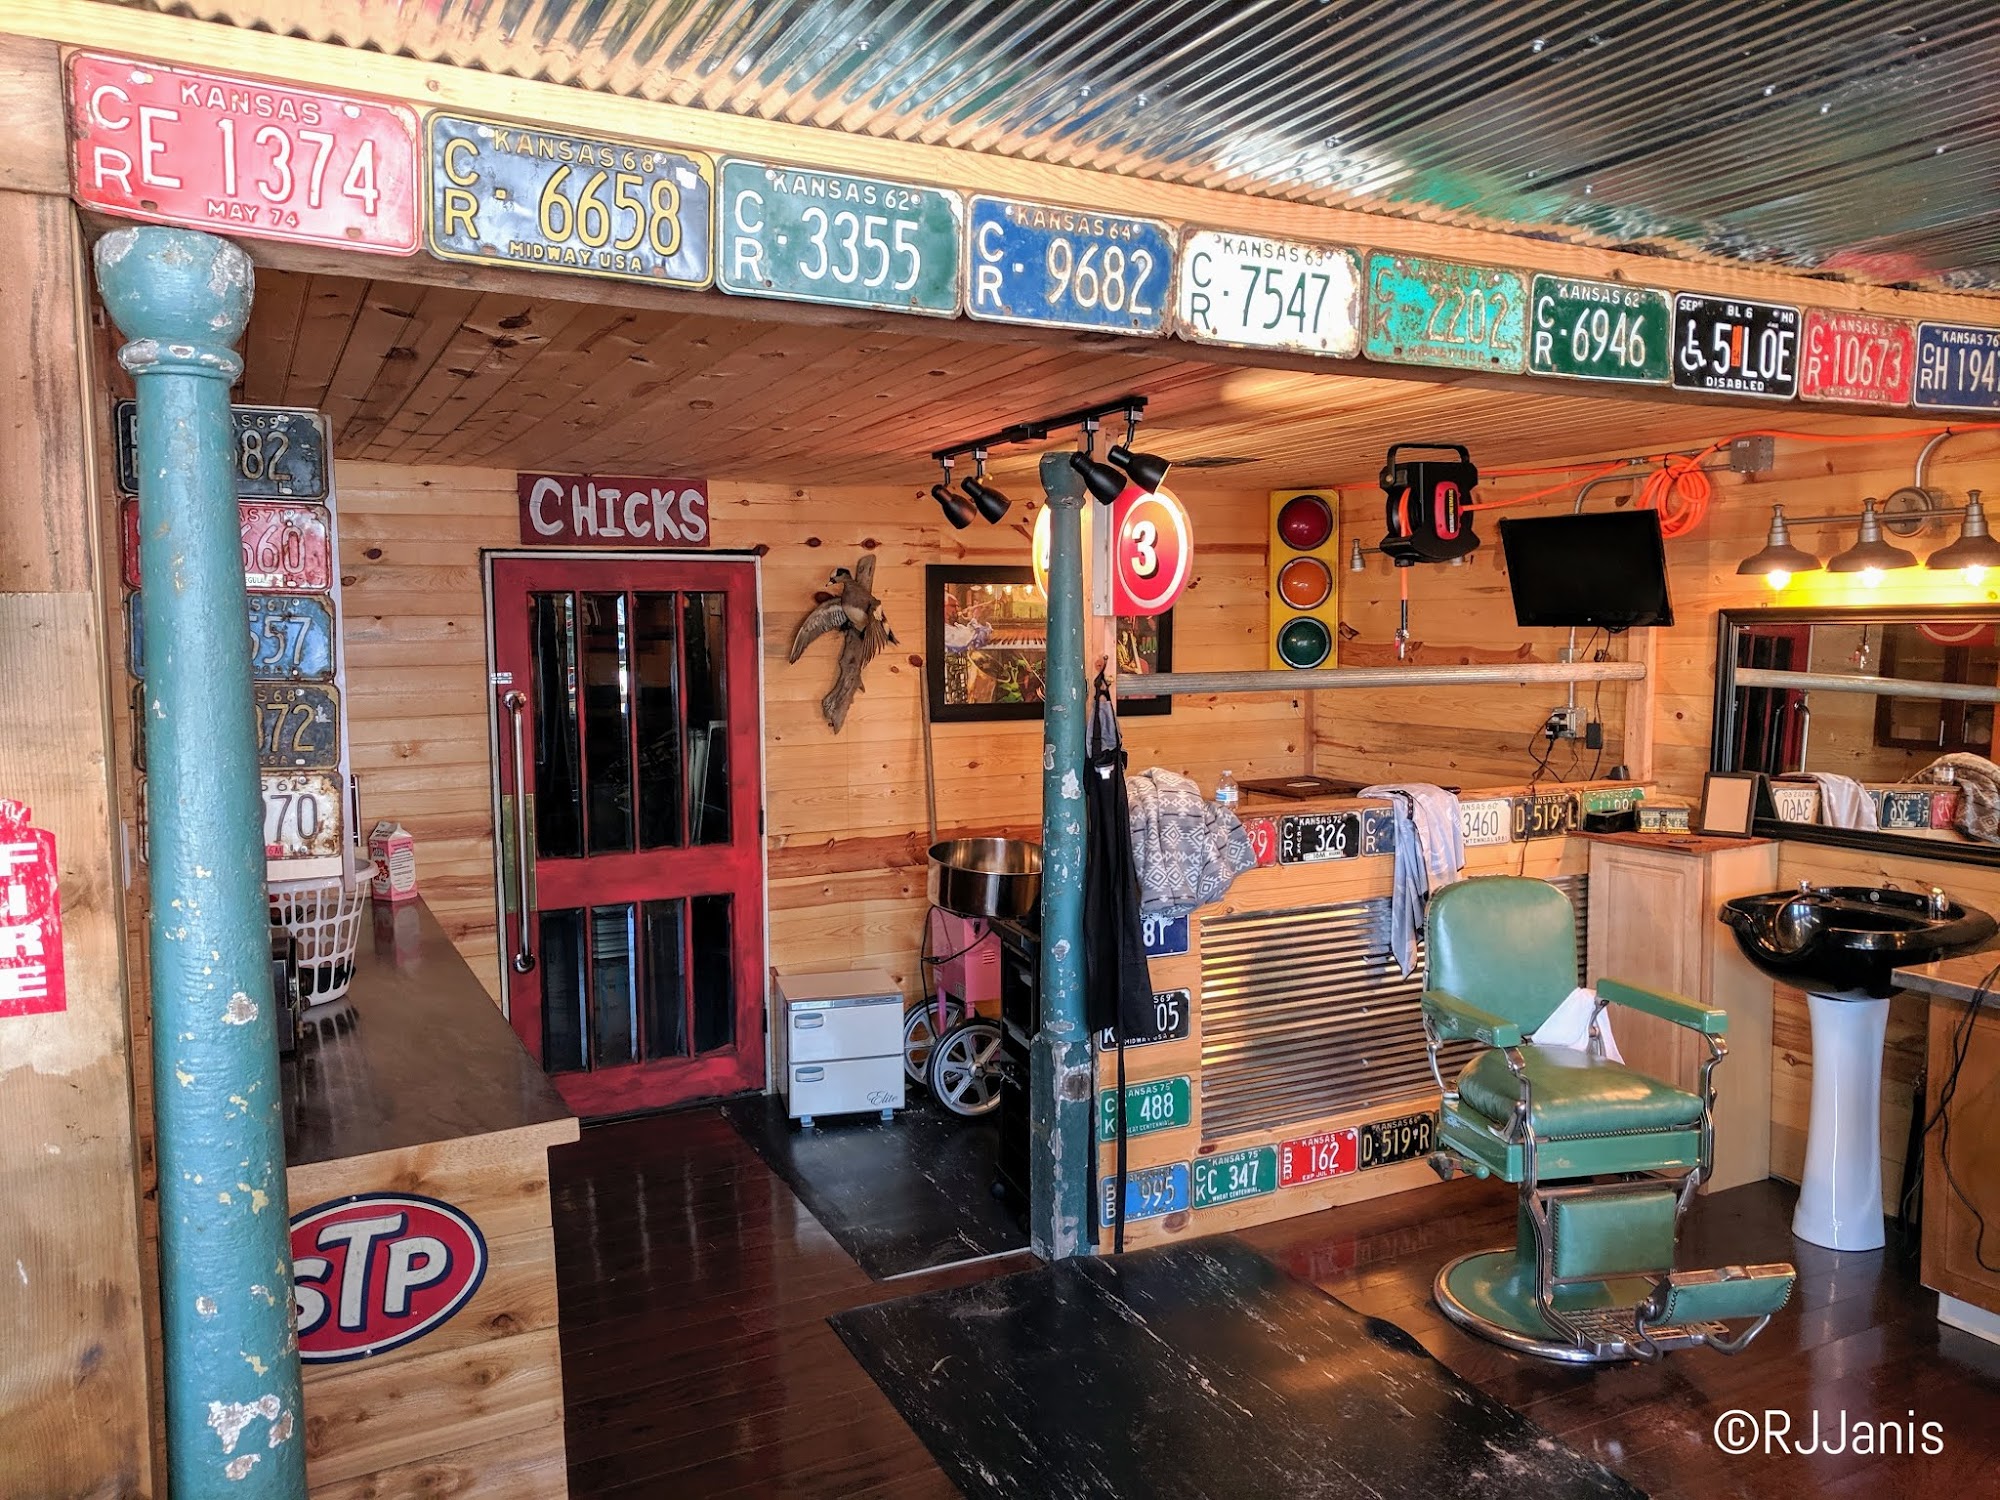 Creative Cuts Barber Shop (formerly Central Barber Shop)